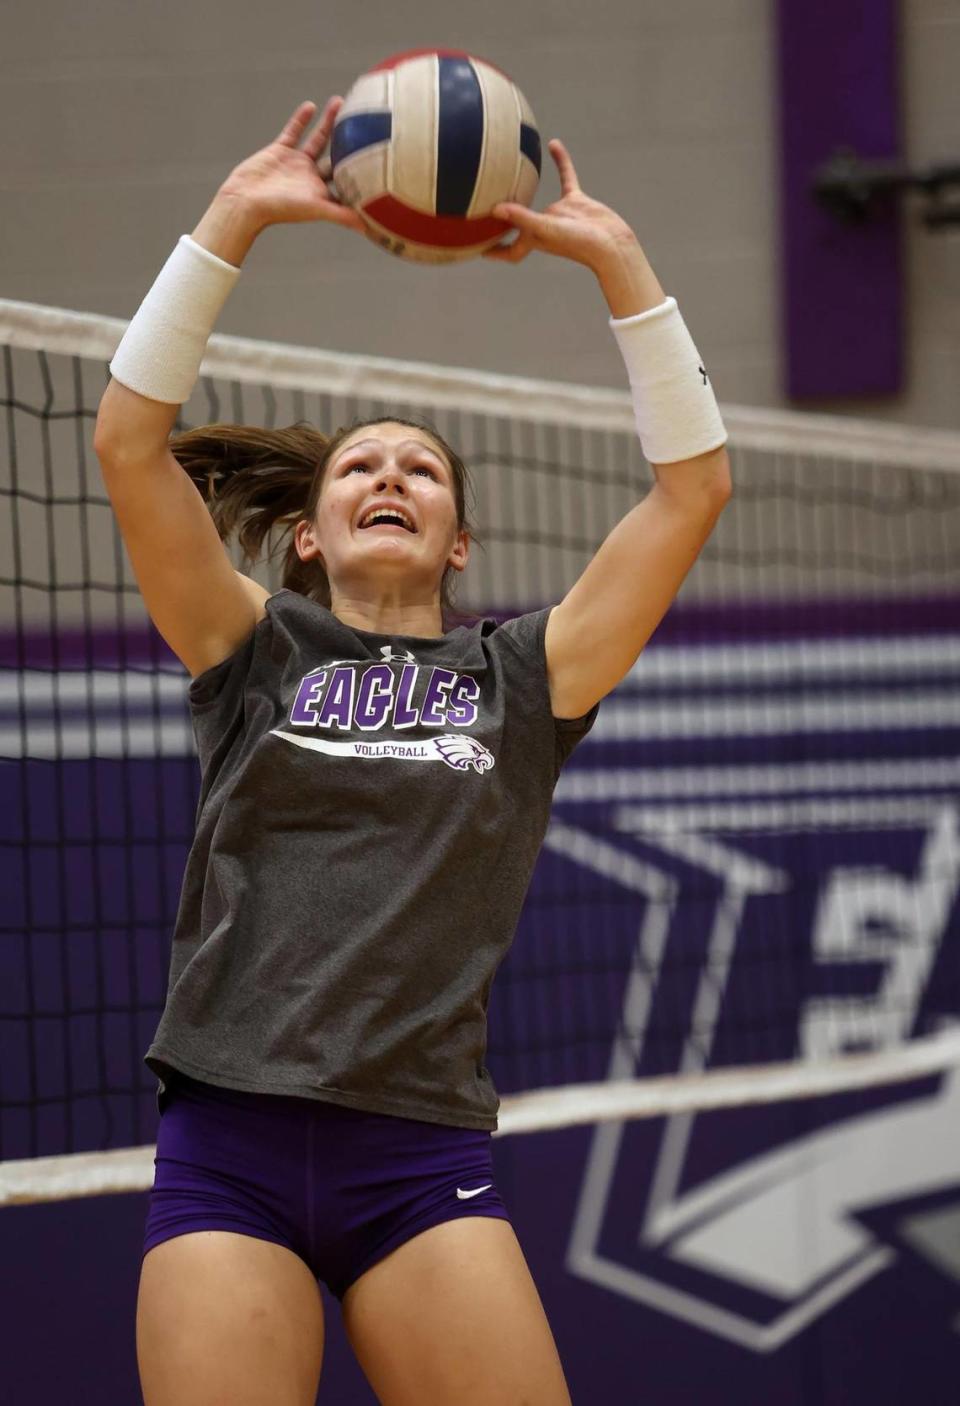 Crowley senior Jaden Polovina sets the ball during a drill at tryouts for the upcoming varsity volleyball team on Monday, August 1, 2022. Polovina has committed to playing volleyball at McPherson College in Kansas after graduation.